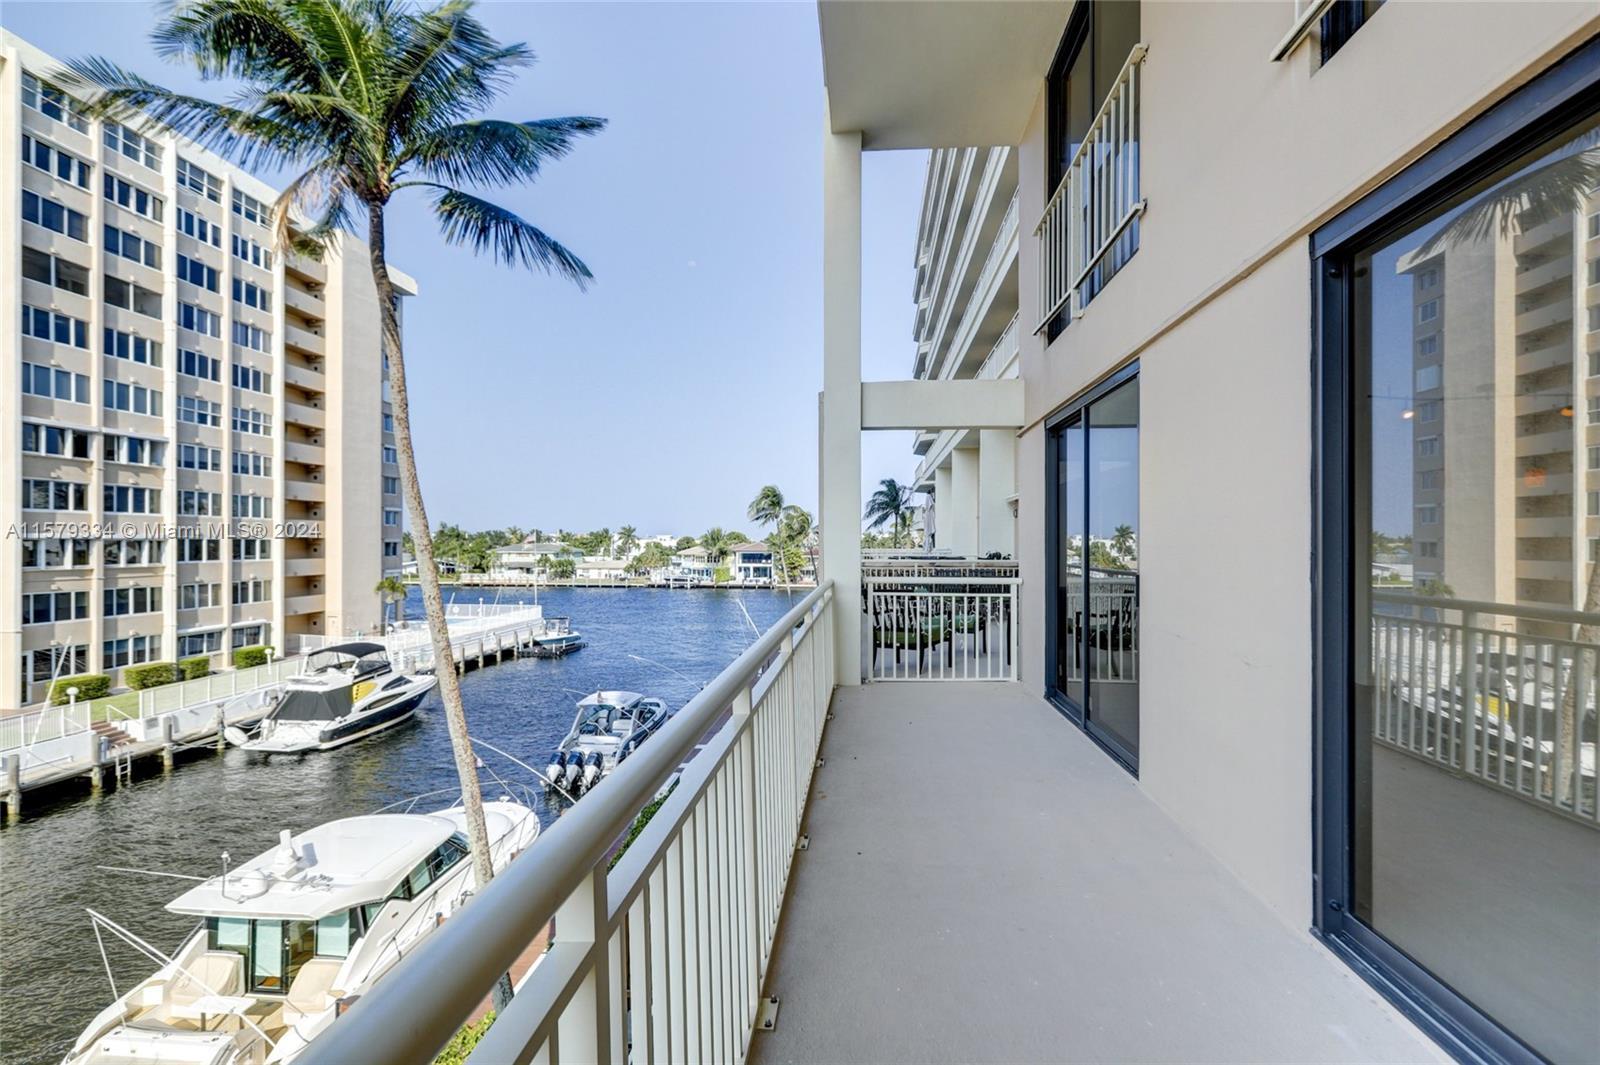 Photo of 3100 NE 48th St #306 in Fort Lauderdale, FL